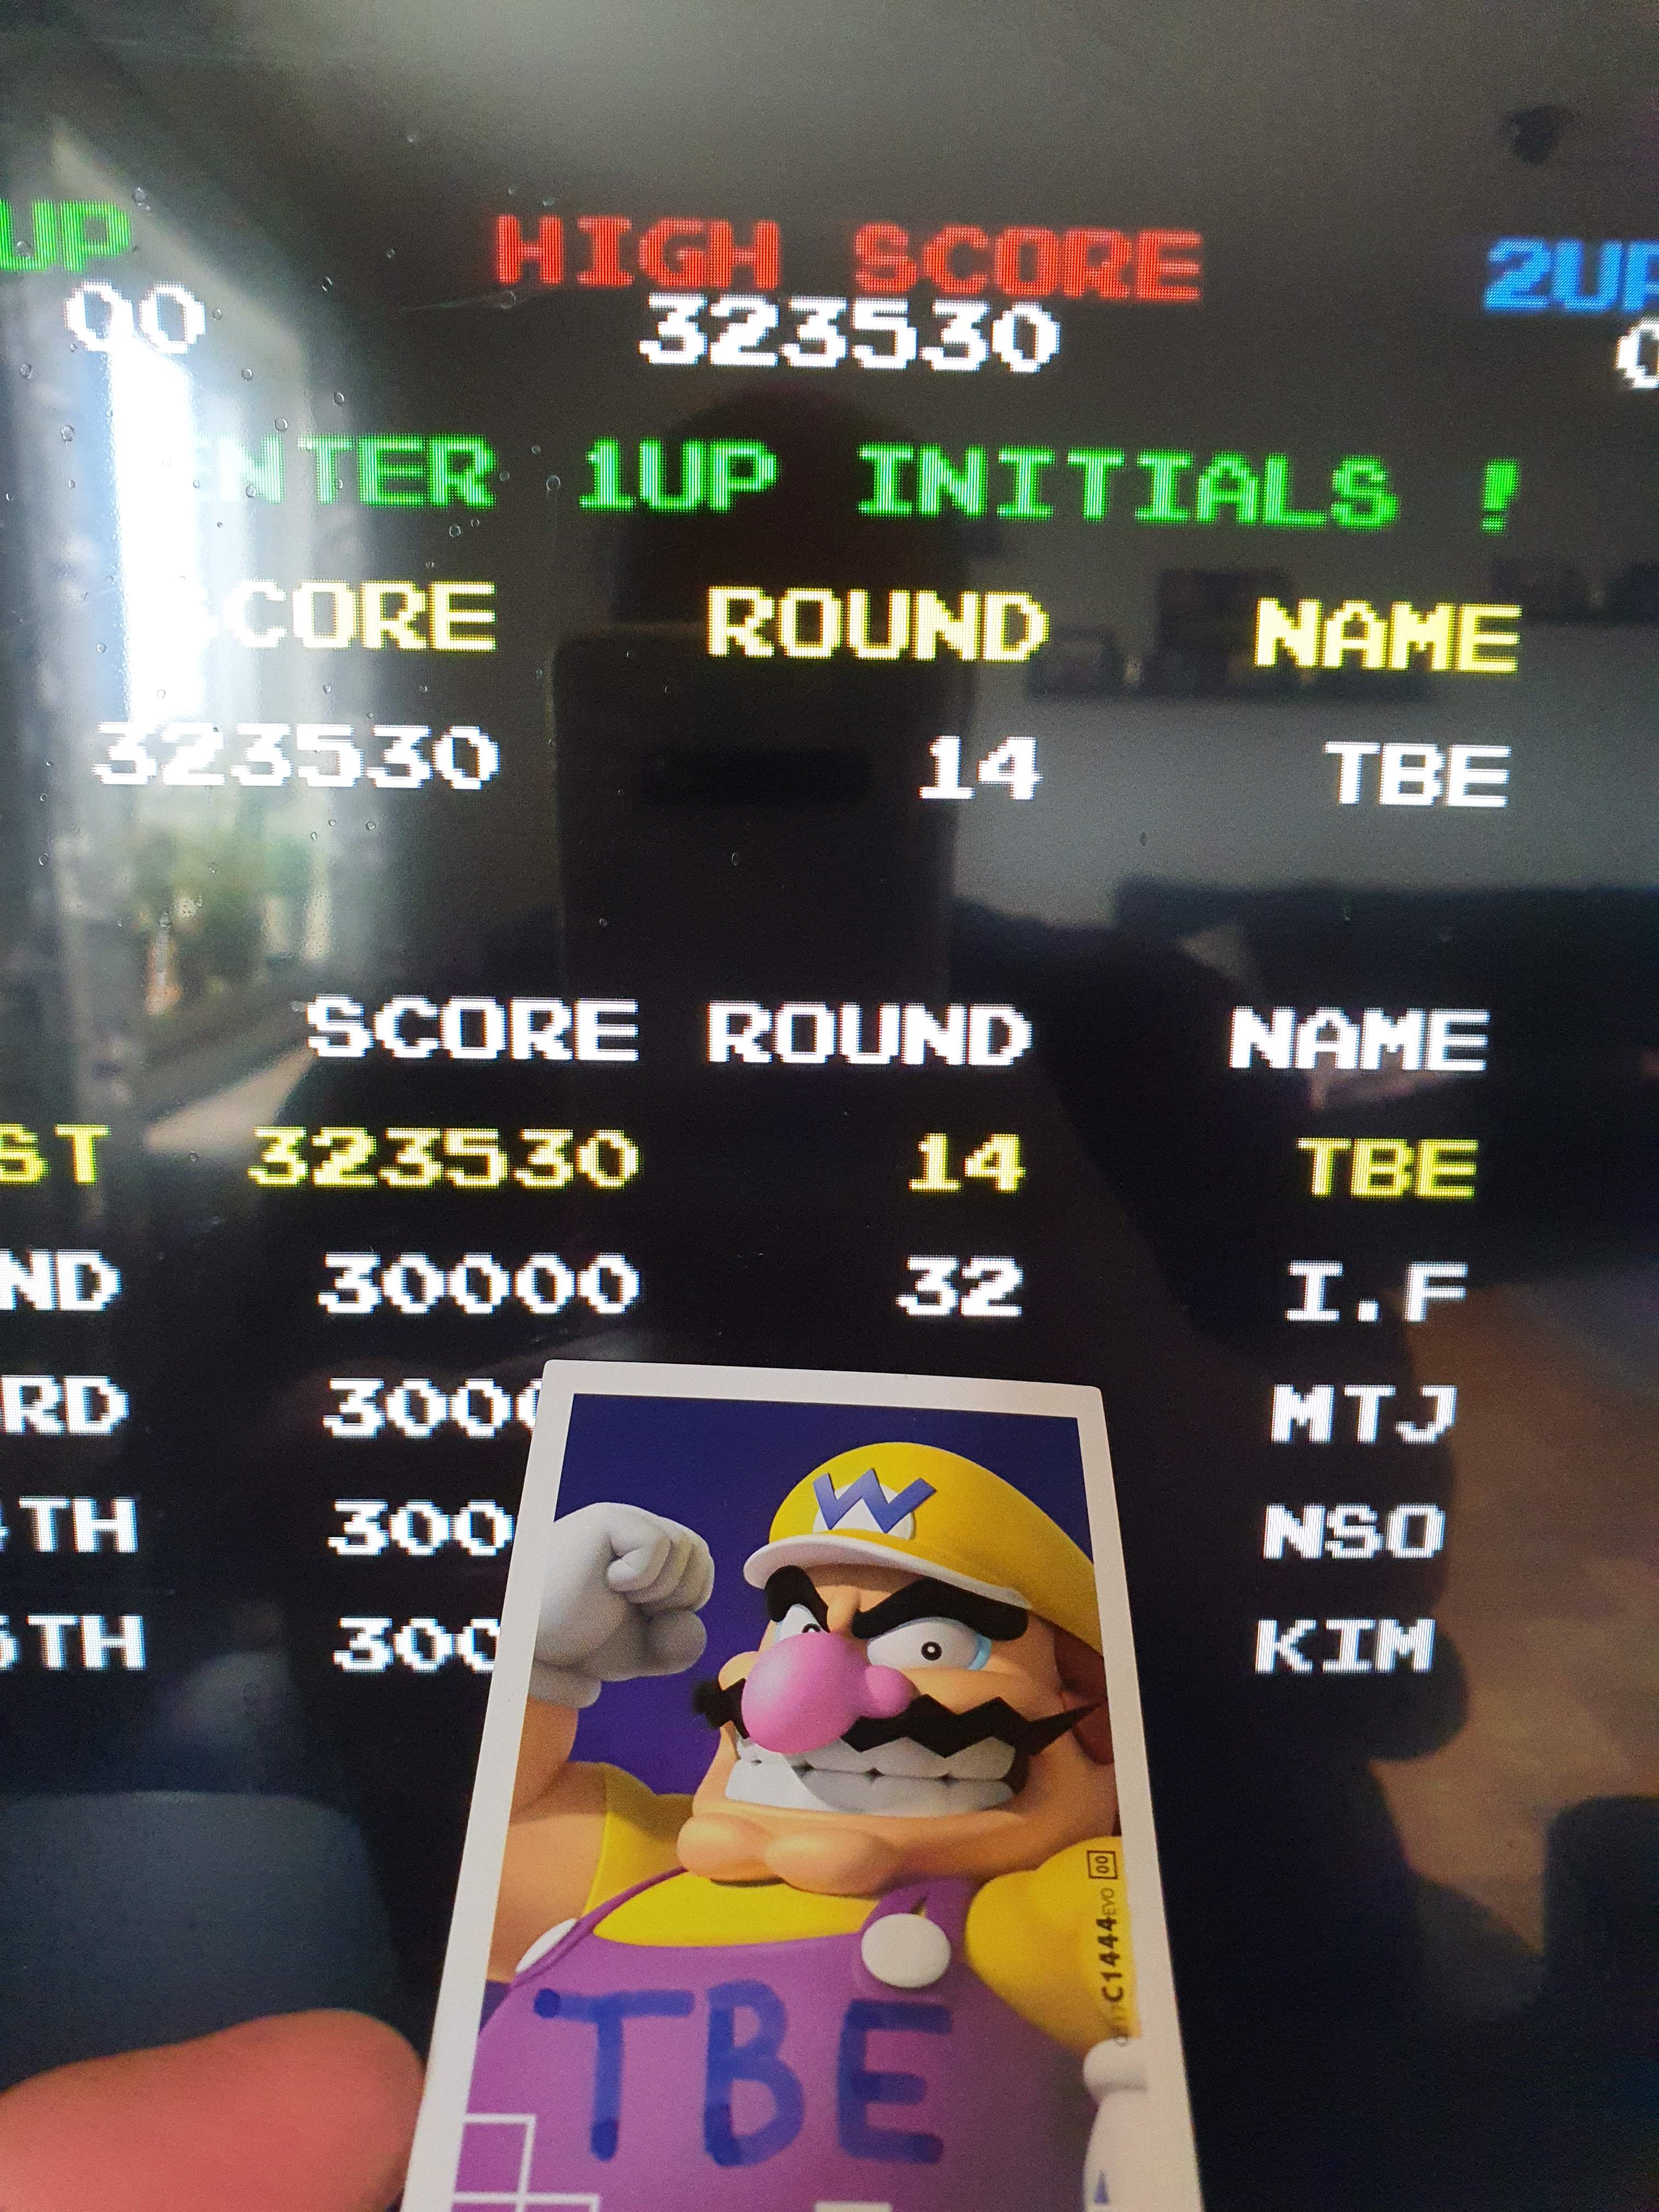 Sixx: Bubble Bobble Also Featuring Rainbow Islands: Bubble Bobble (Playstation 1 Emulated) 323,530 points on 2020-05-01 09:54:19